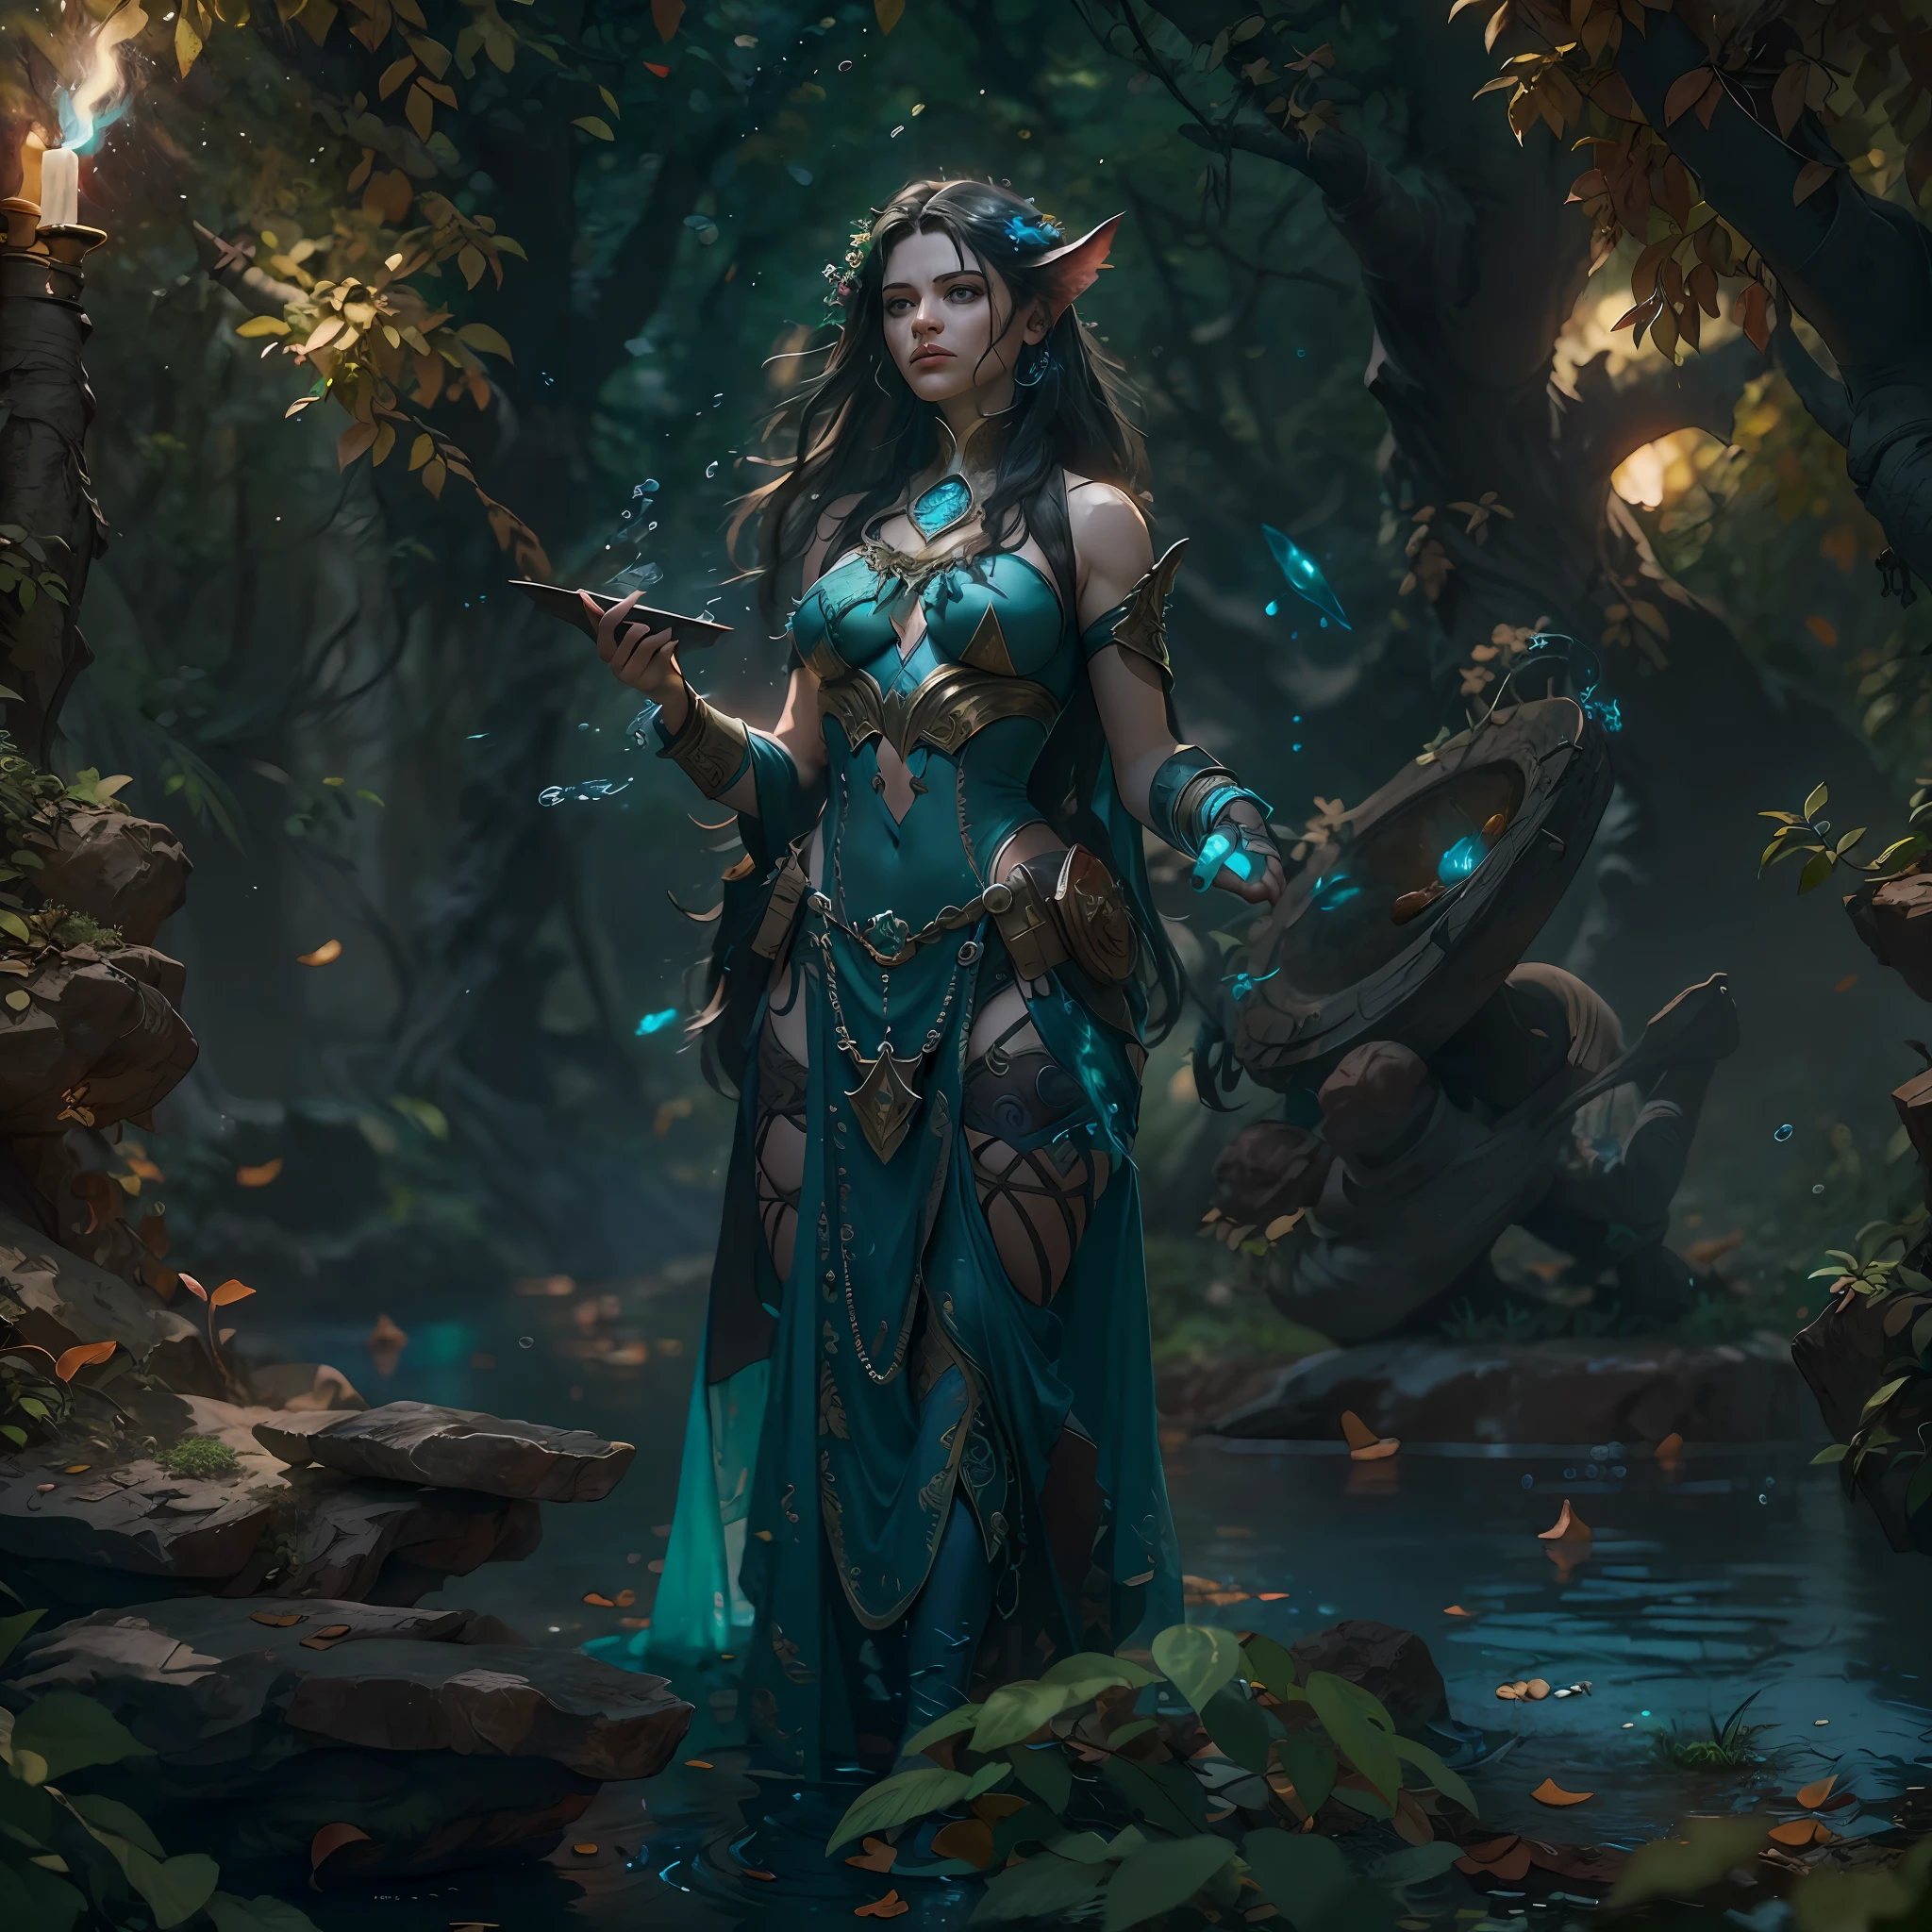 high details, best quality, 8k, [ultra detailed], masterpiece, best quality, (extremely detailed), ultra wide shot, photorealistic, fantasy art, dnd art, rpg art, realistic art, an ultra wide picture of human female (intense details, Masterpiece, best details: 1.5) in underground druid grove casting a spell, red magical light (intense details, Masterpiece, best details: 1.5), wearing leather armor (intense details, Masterpiece, best details: 1.5), wearing cloak (intense details, Masterpiece, best details: 1.5), wearing  boots, high heeled boots,  holy symbol, blue light from symbol, dynamic hair, intense eyes, dynamic eyes, D&D human female (intense details, Masterpiece, best details: 1.5), black hair, long hair, fantasy [underground] (intense details, Masterpiece, best details: 1.5), druid grove, water fall details, rich fantasy underground life details (intense details, Masterpiece, best details: 1.5) ,stone pillars (intense details, Masterpiece, best details: 1.5),  animals, water springs, soft light, phosphoric light. dynamic light (intense details, Masterpiece, best details: 1.5), fungi in the background, celestial background, ((divine worship atmosphere)), high details, best quality, highres, ultra wide angle, octane rendering